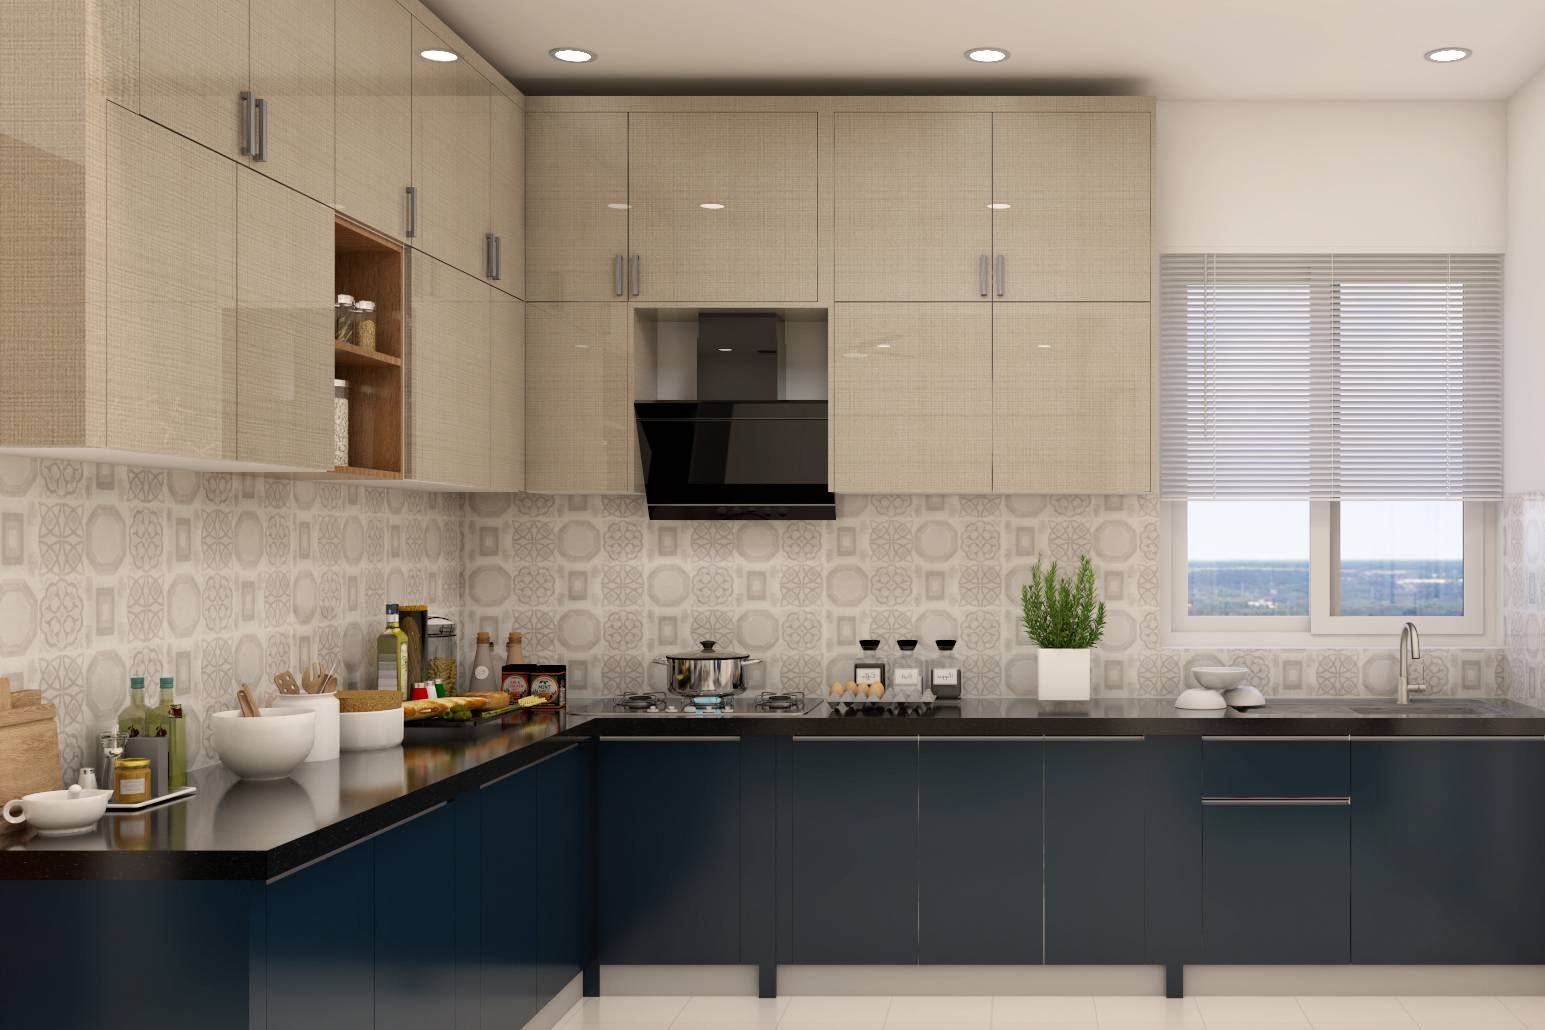 Contemporary L-Shaped Kitchen Design With Grey And White Dado Tiles